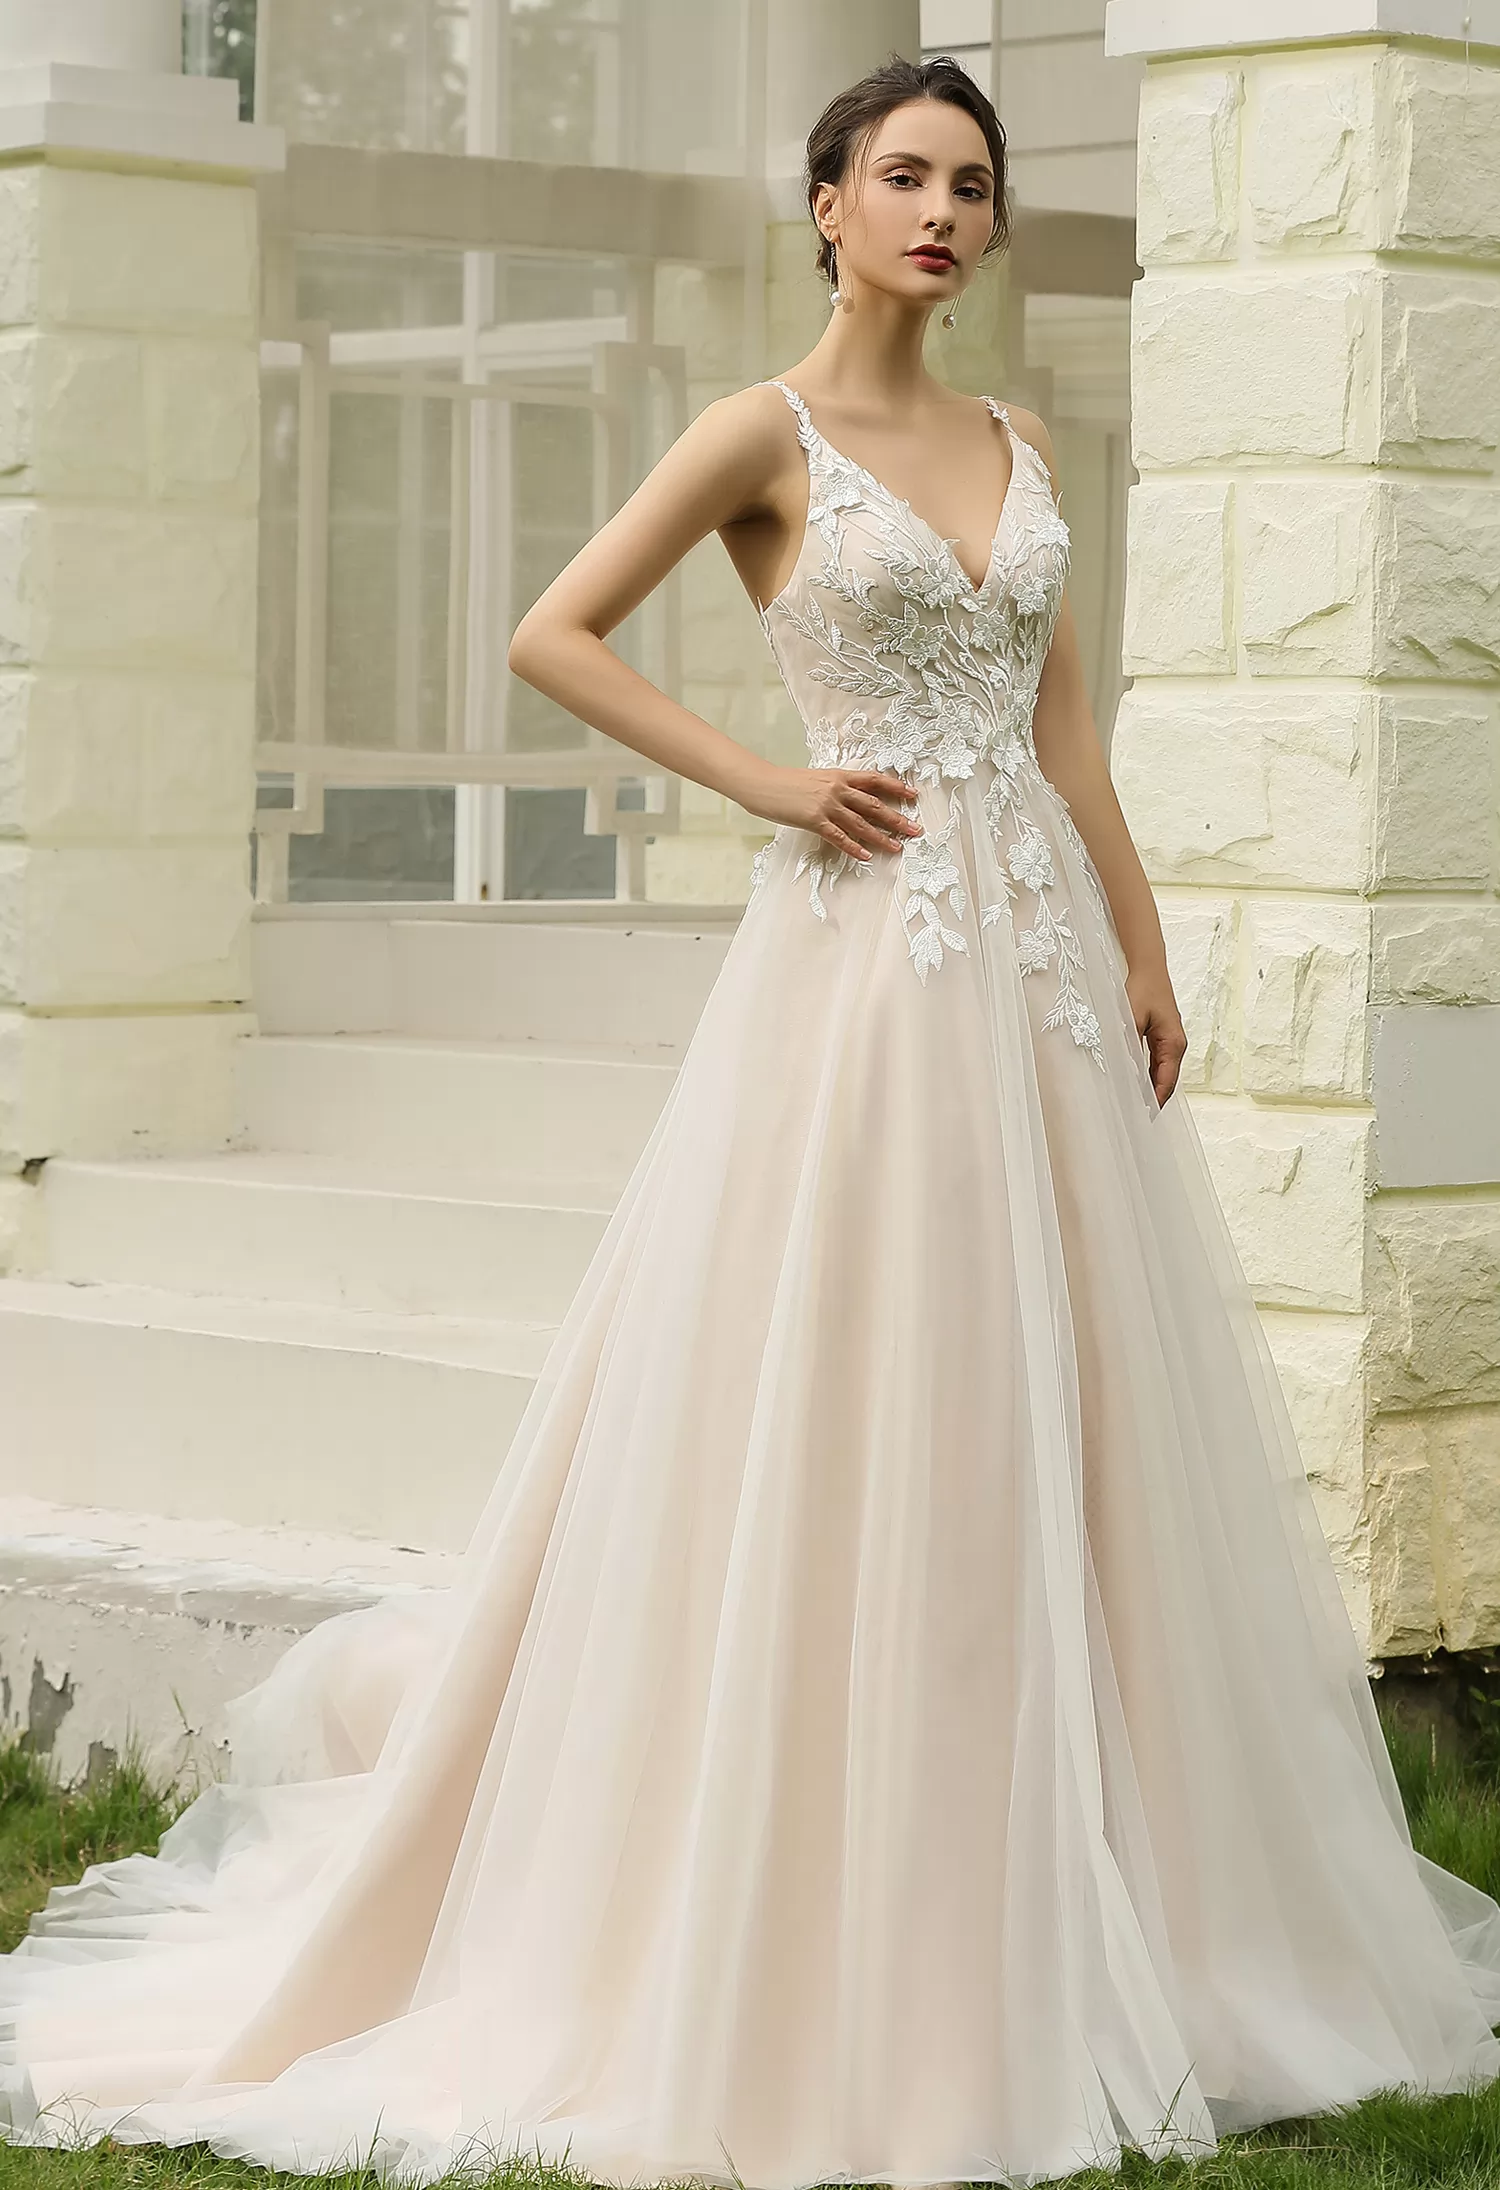 Princess Ballgown Wedding Dress with Floral Lace Straps